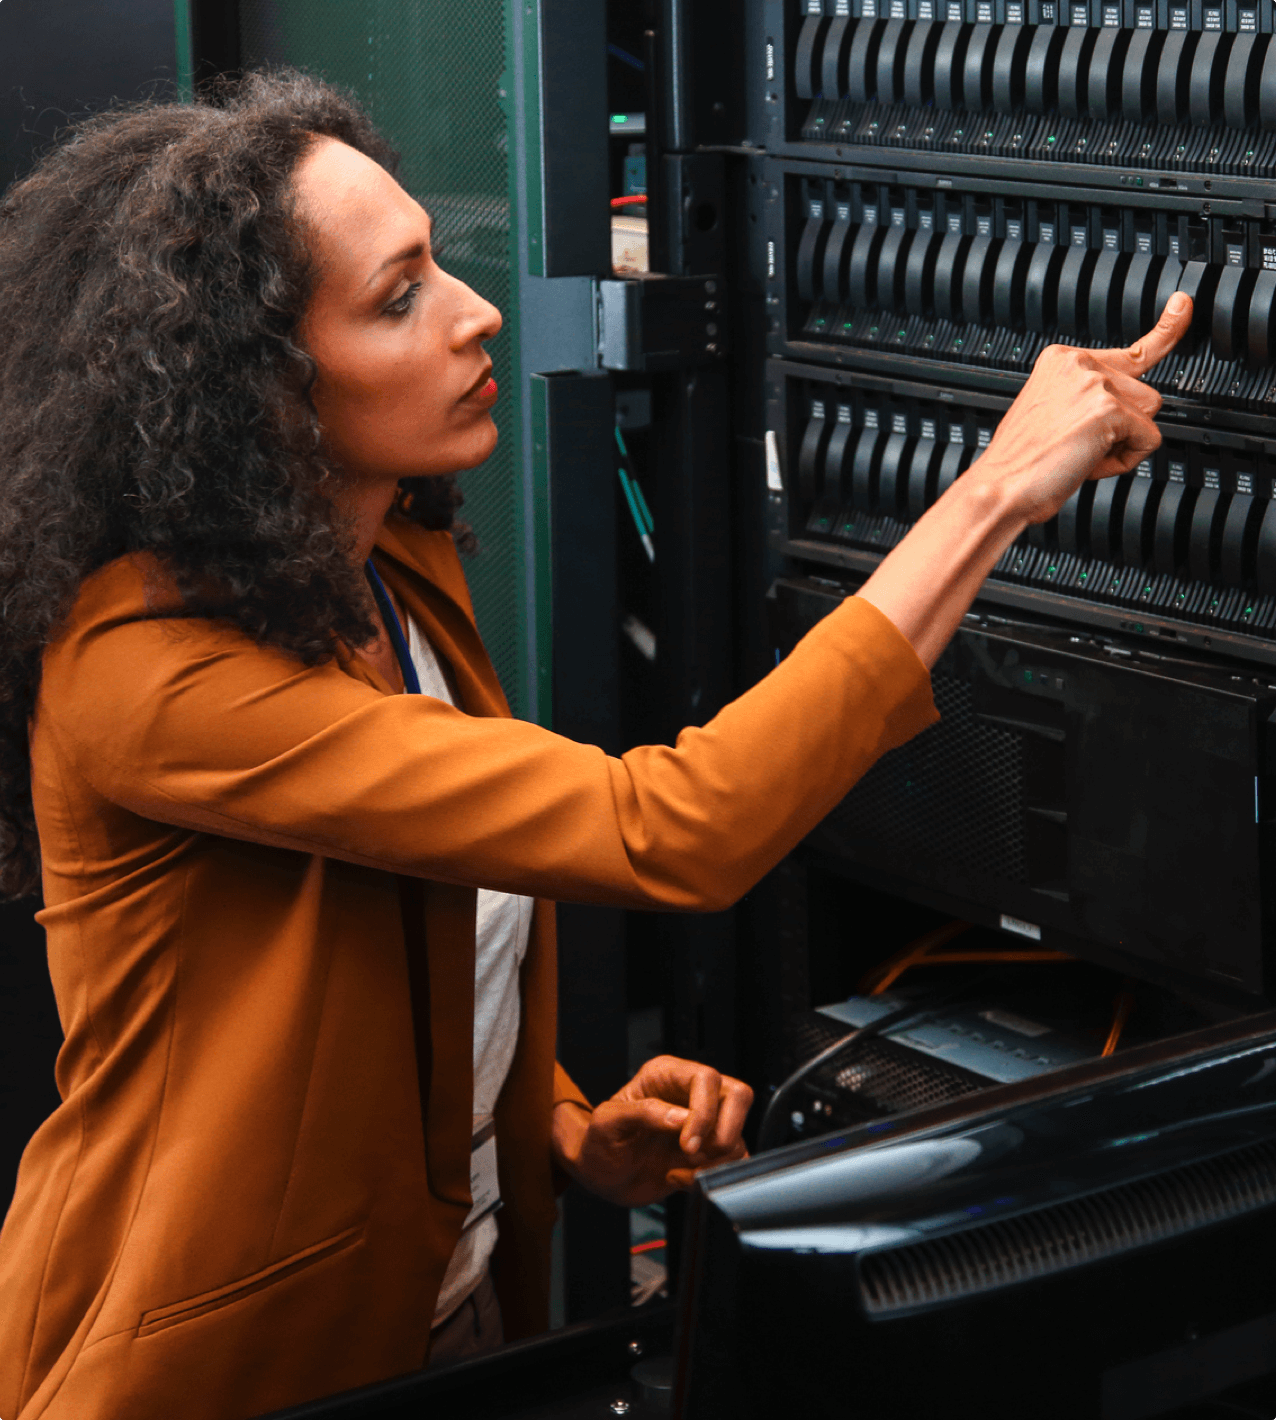 Woman taking out hard drive from a rack of disks in a data center. Cloud computing technician.